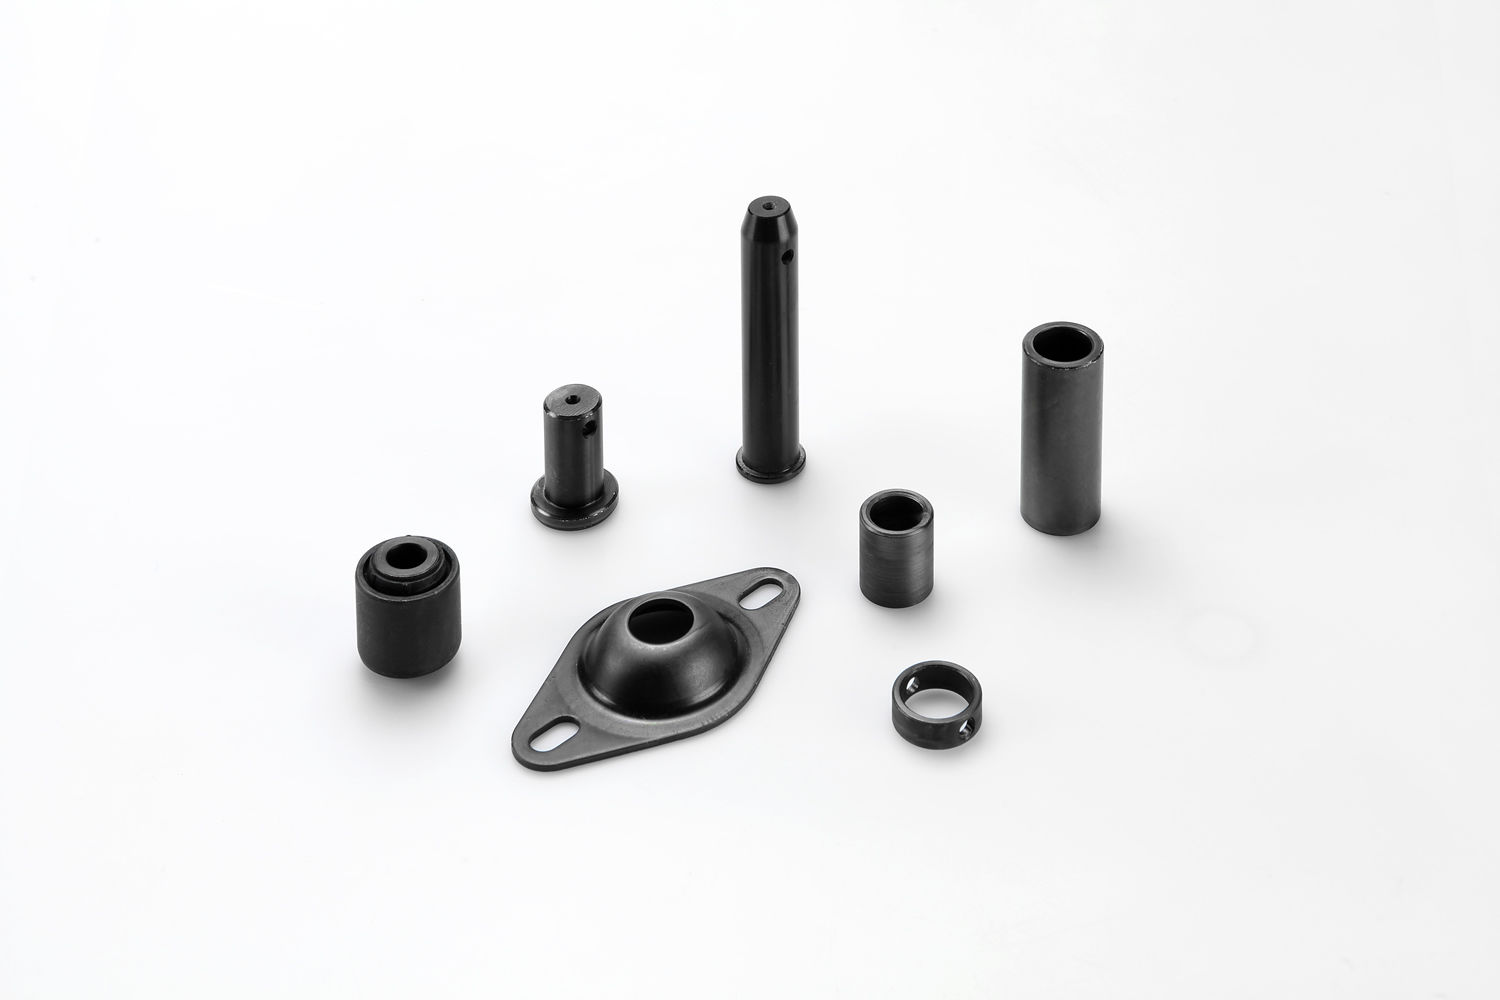 Metal parts with a black finish, zinc nickel layer plus a black passivation and sealant for improved corrosion resistance.